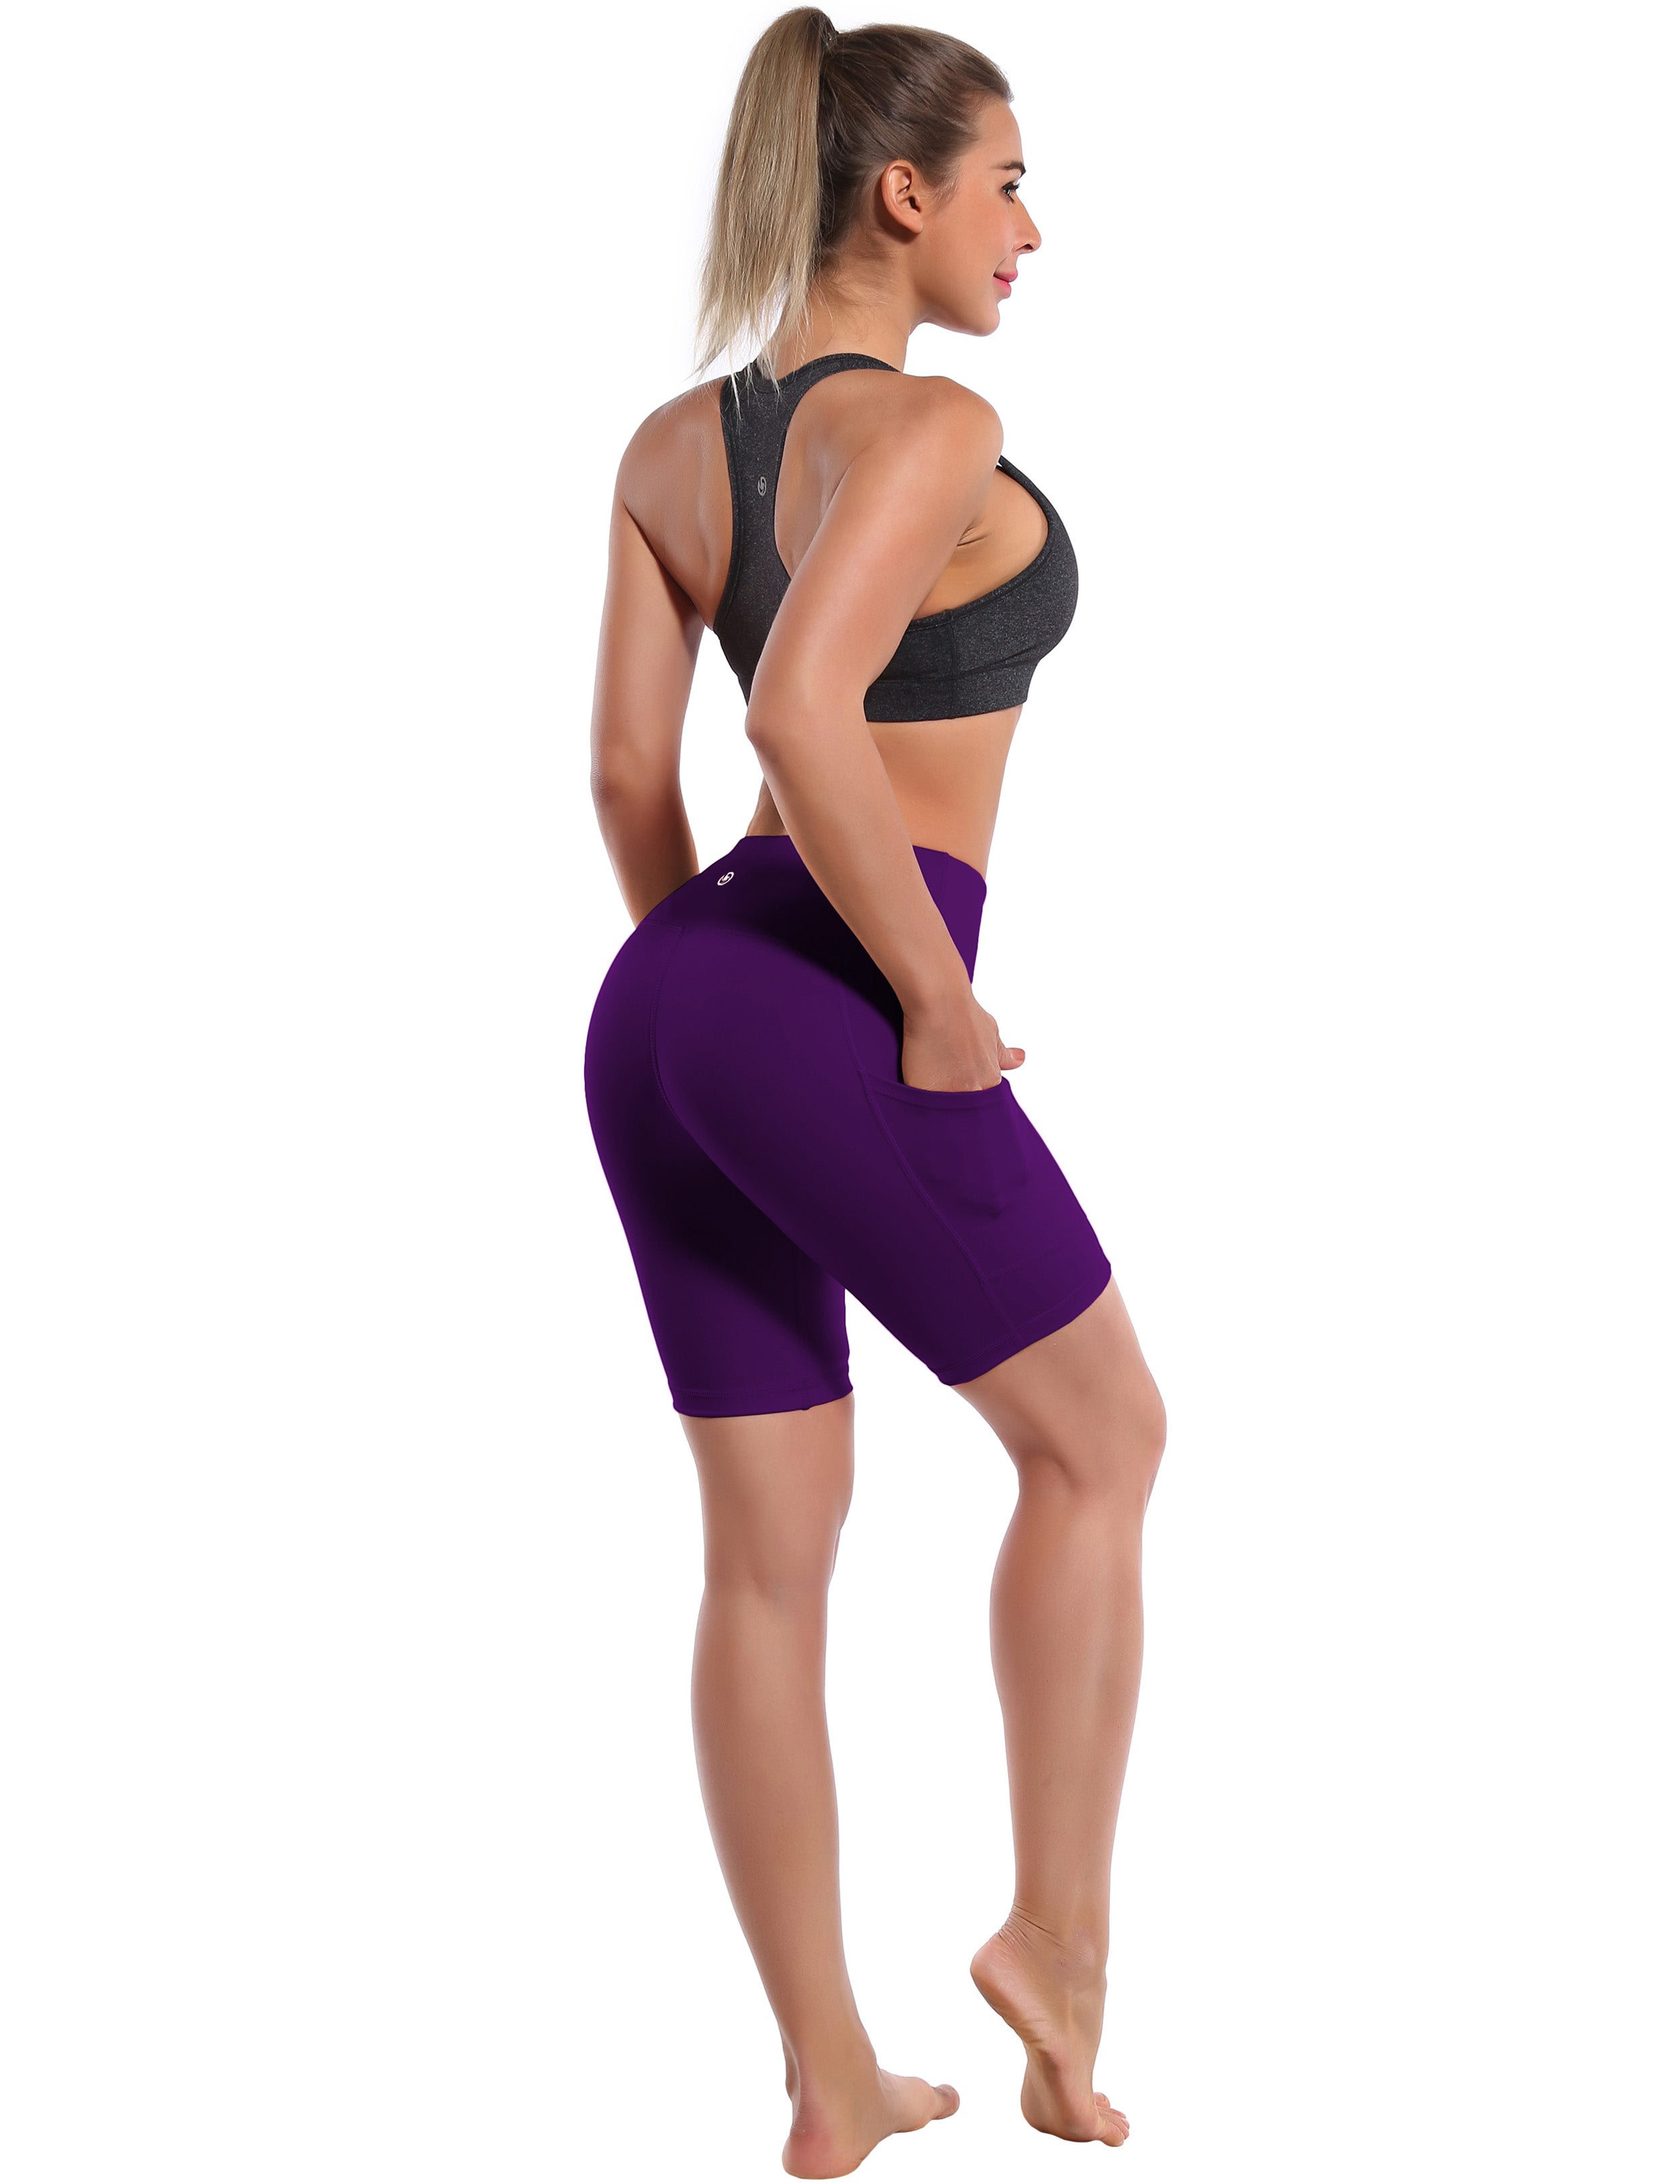 8" Side Pockets Jogging Shorts eggplantpurple Sleek, soft, smooth and totally comfortable: our newest style is here. Softest-ever fabric High elasticity High density 4-way stretch Fabric doesn't attract lint easily No see-through Moisture-wicking Machine wash 75% Nylon, 25% Spandex